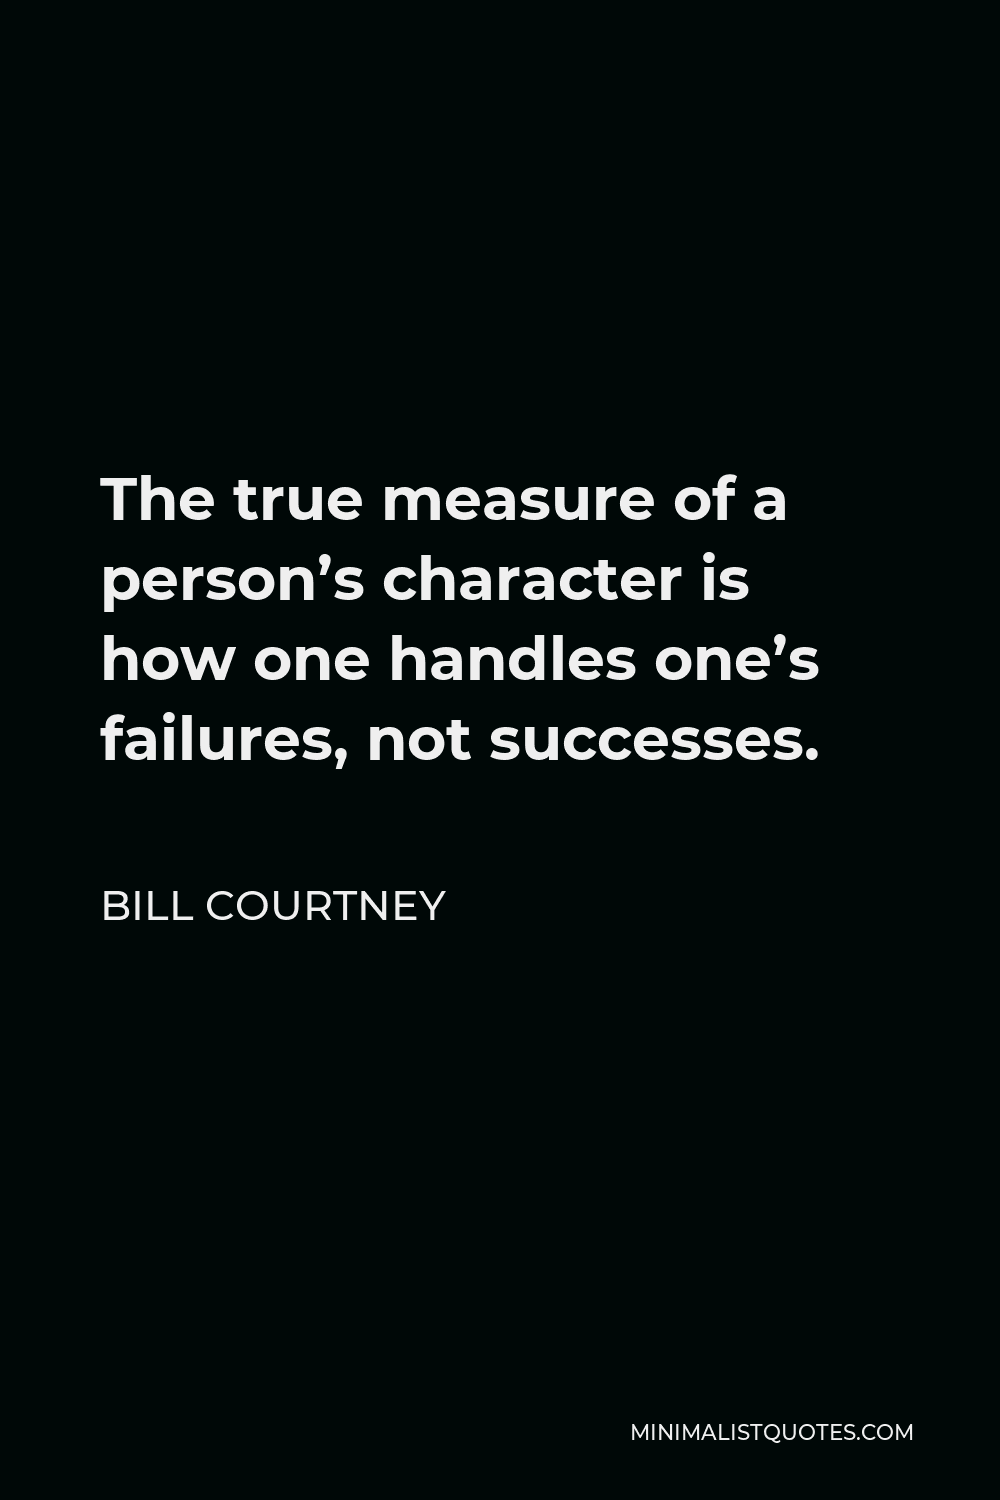 Bill Courtney Quote - The true measure of a person’s character is how one handles one’s failures, not successes.